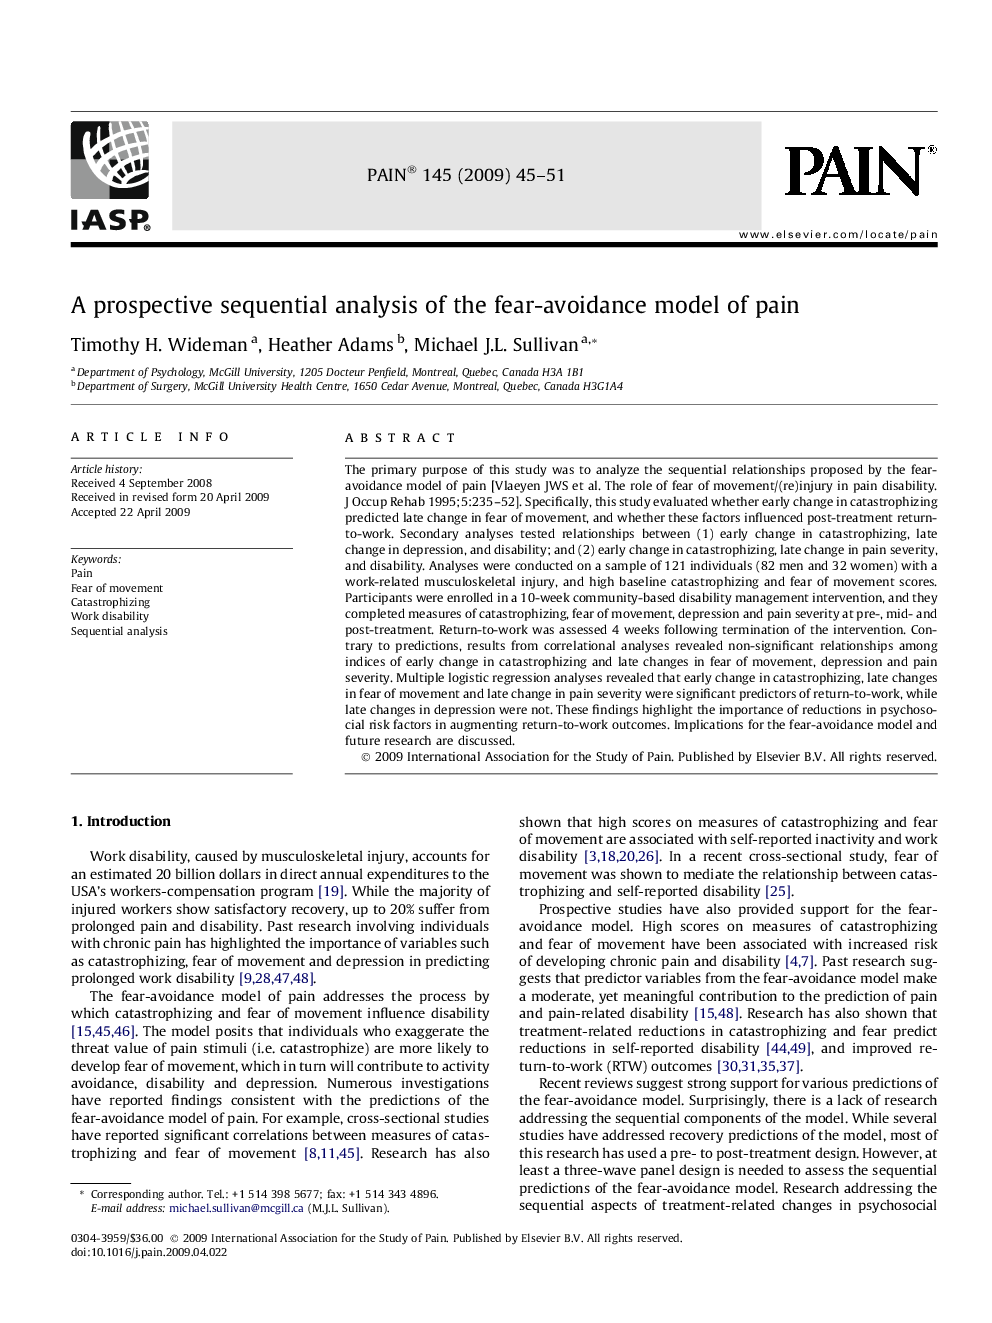 A prospective sequential analysis of the fear-avoidance model of pain